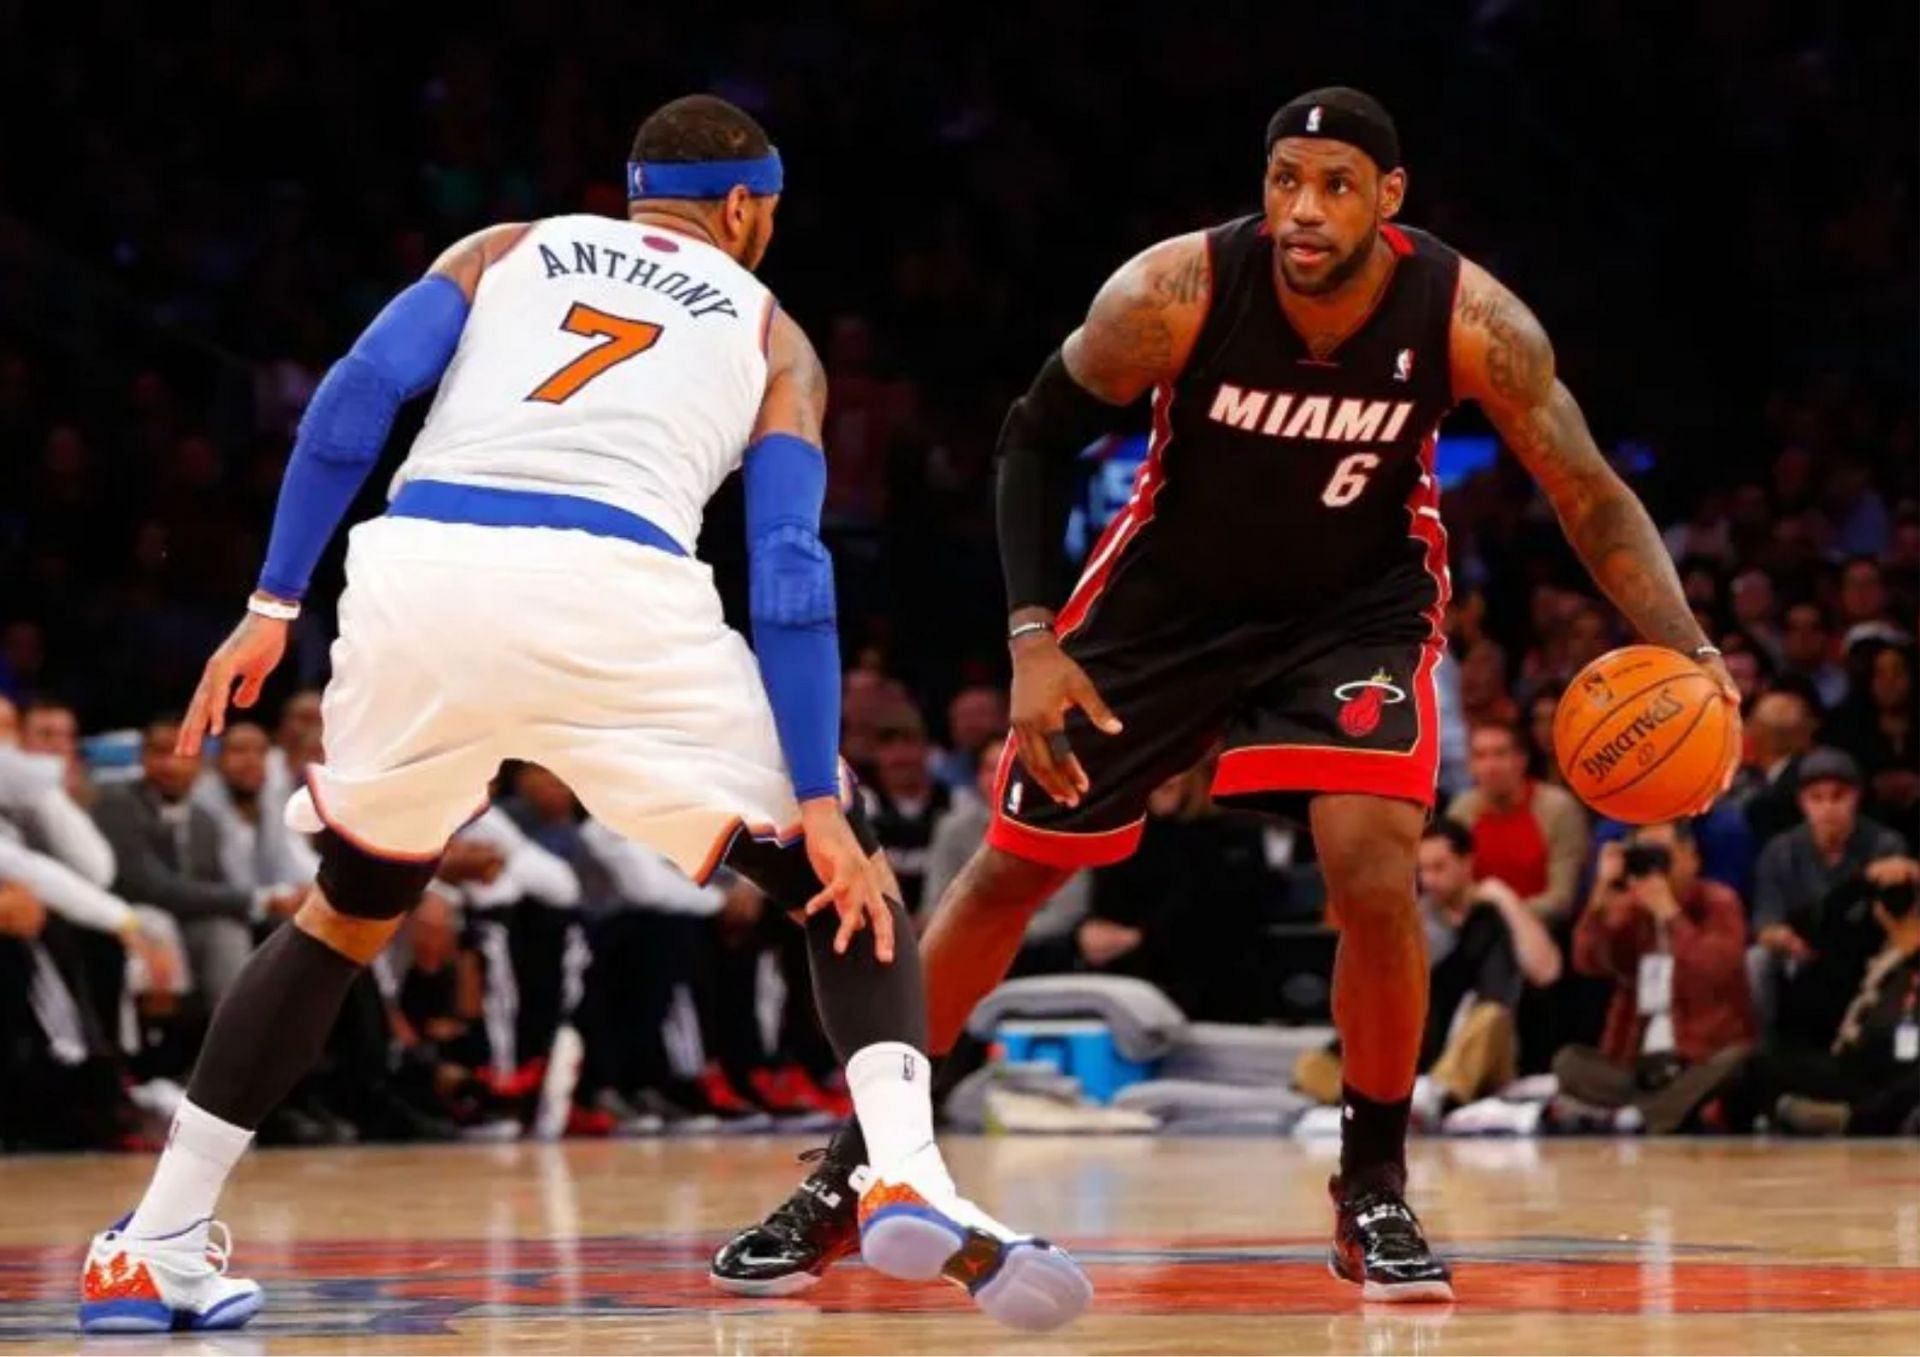 LeBron James and Carmelo Anthony went toe-to-toe in the first round of the 2012 NBA playoffs.